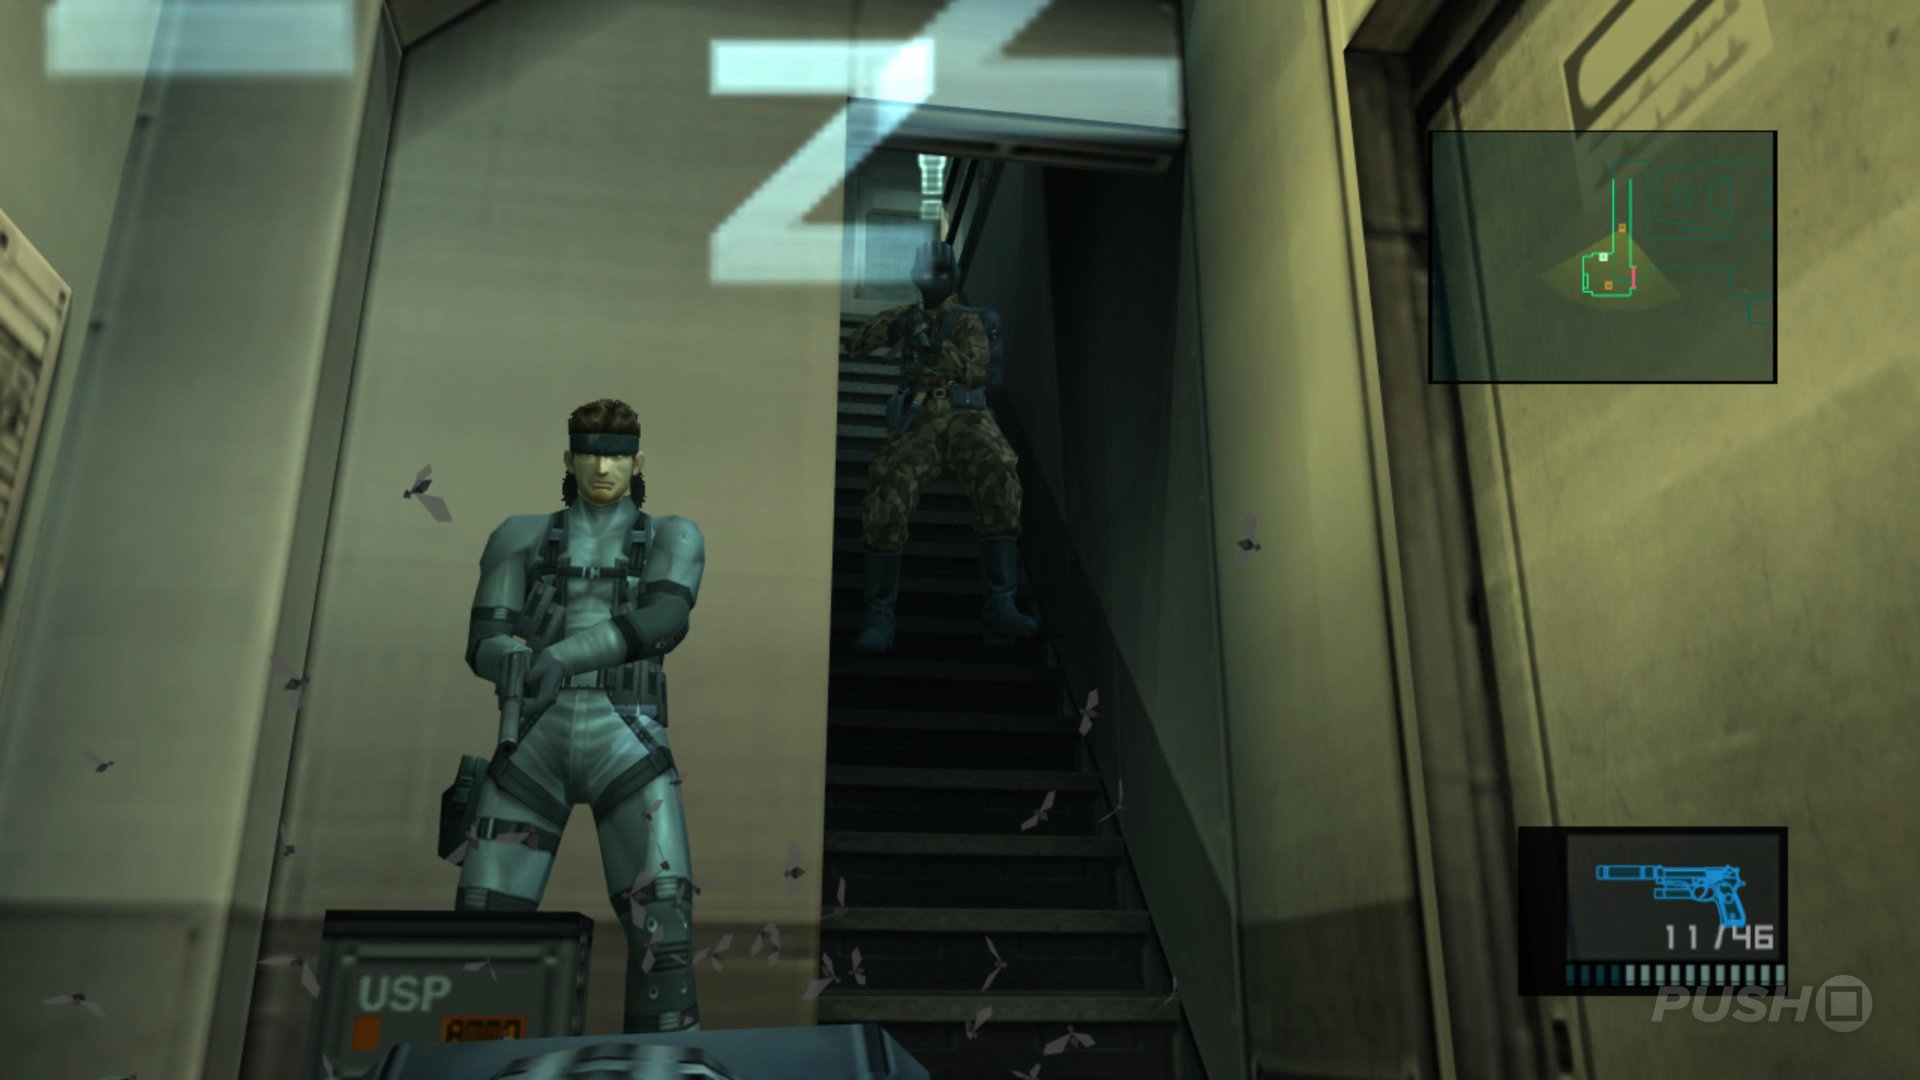 Metal Gear Solid Master Collection Review: A cash grab